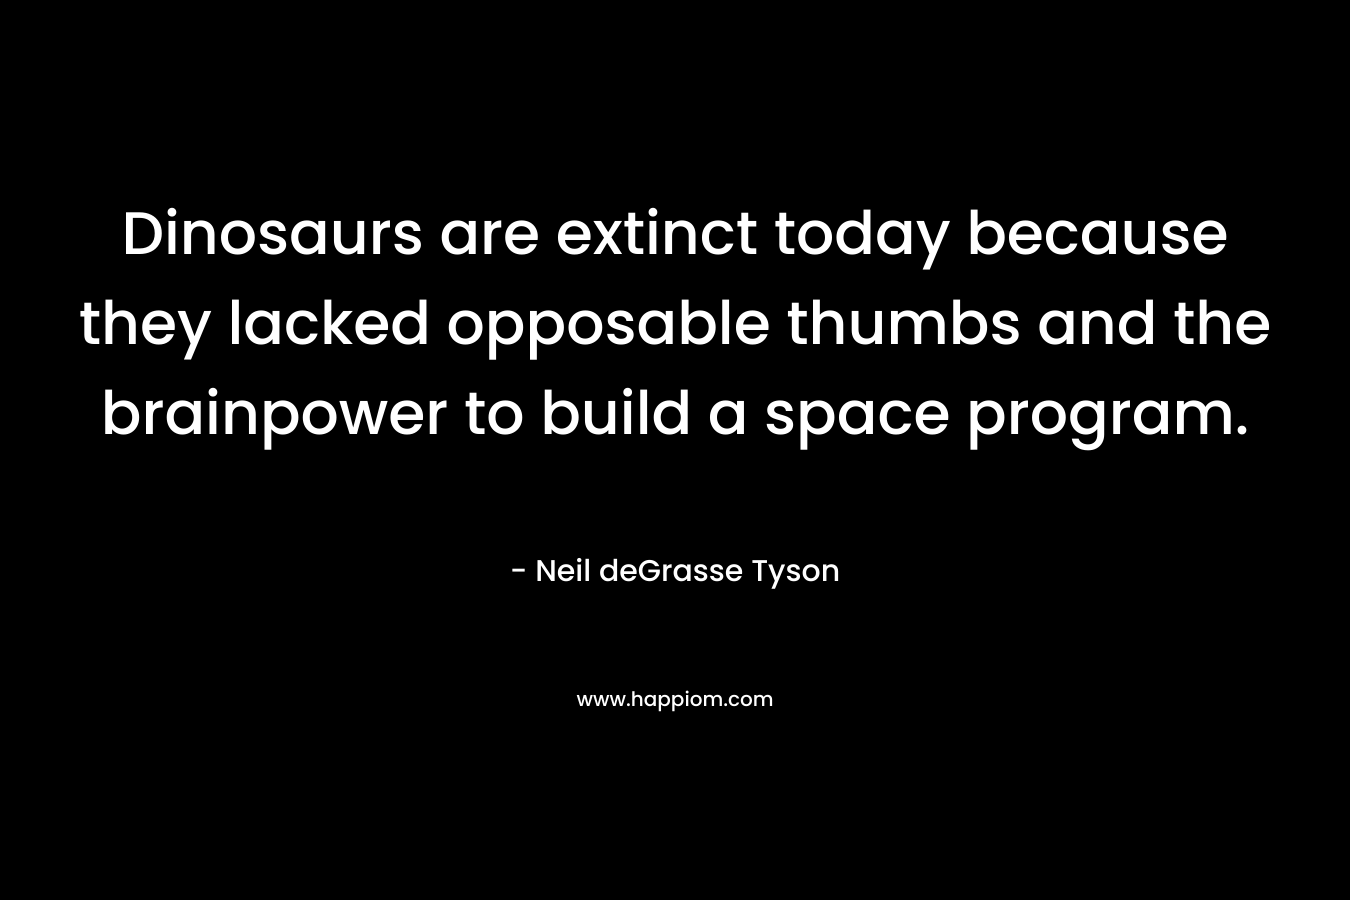 Dinosaurs are extinct today because they lacked opposable thumbs and the brainpower to build a space program. – Neil deGrasse Tyson